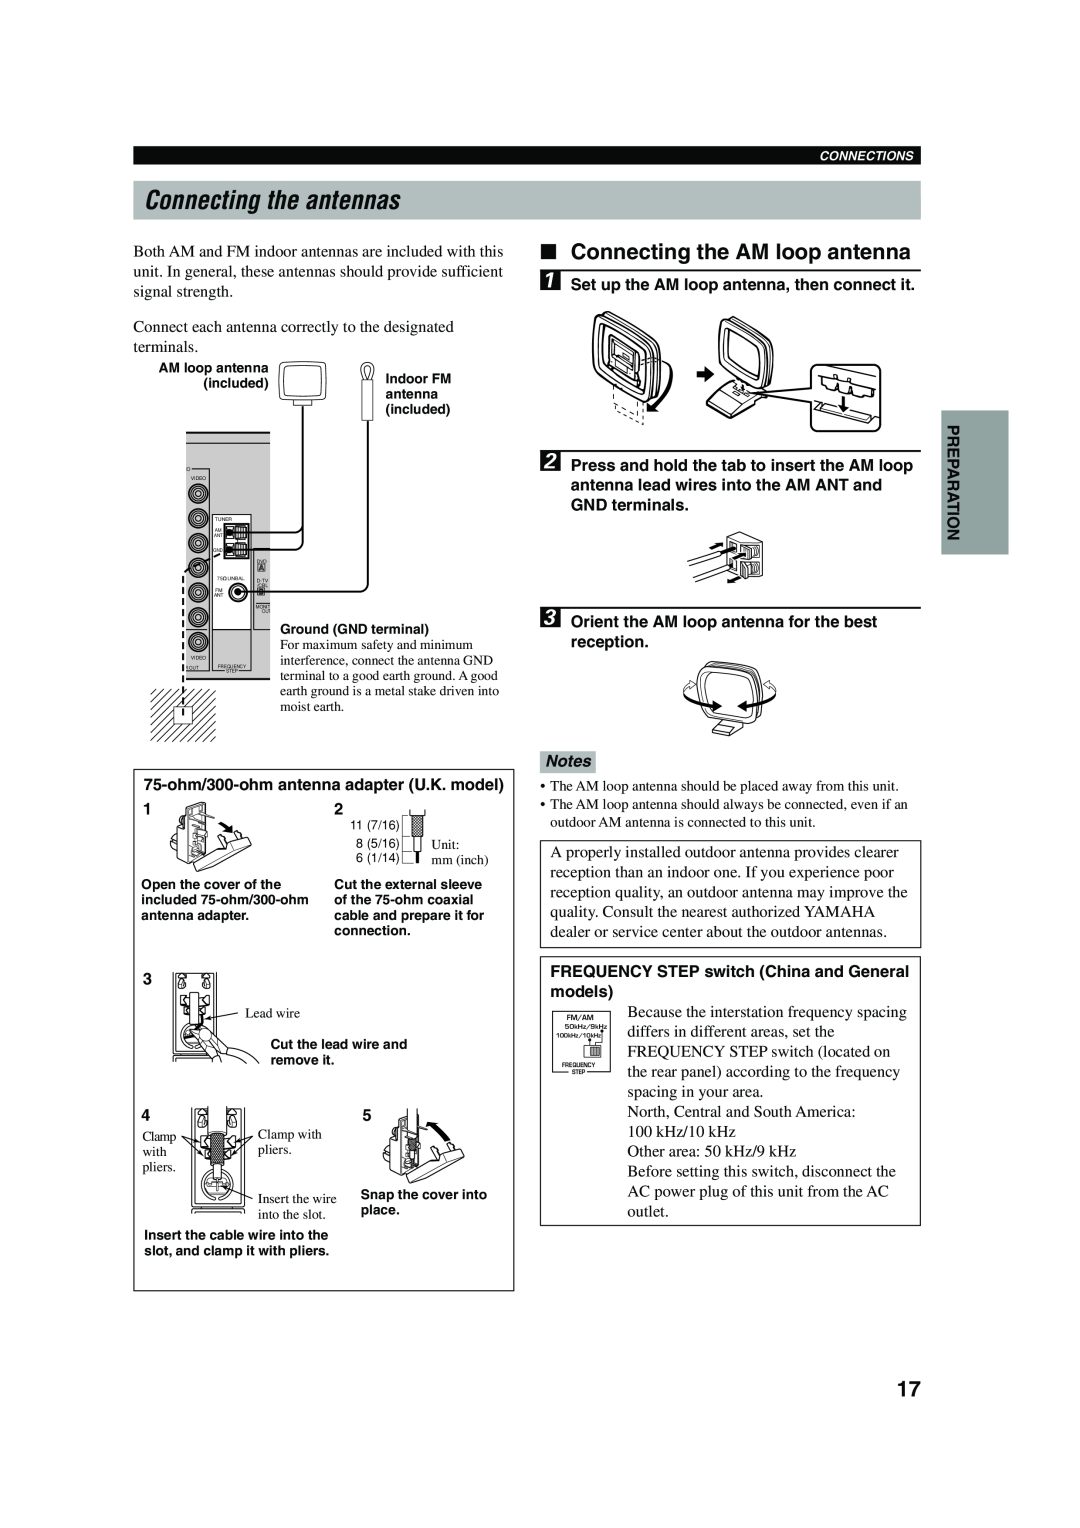 Yamaha HTR-5560 owner manual Connecting the antennas, Connecting the AM loop antenna 